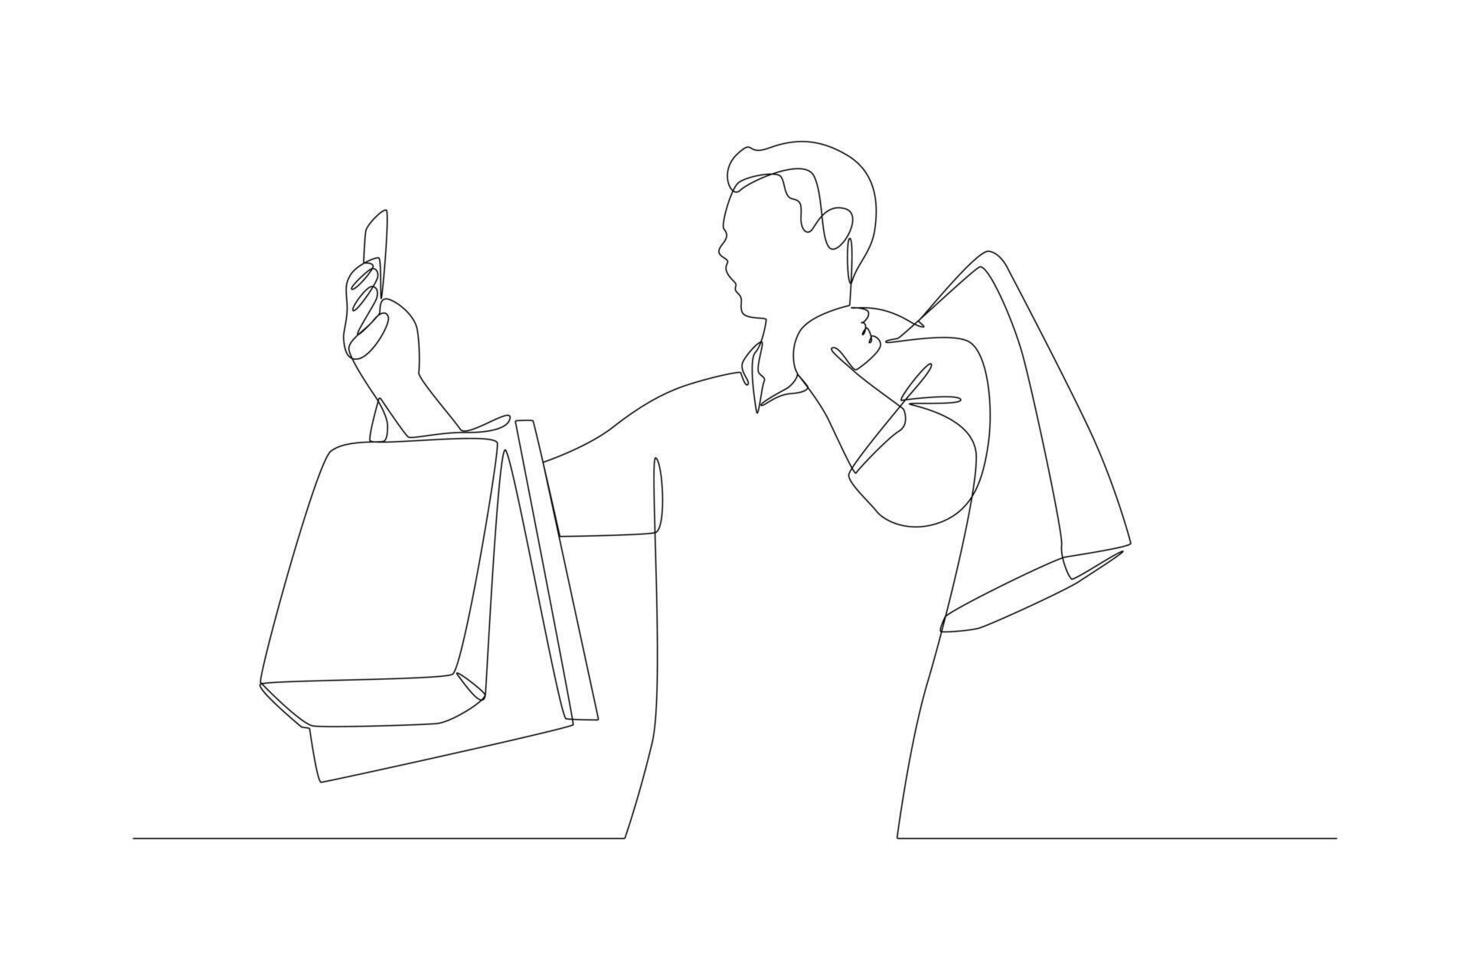 Continuous one line drawing Happy people shopping. Shopping concept. Doodle vector illustration.